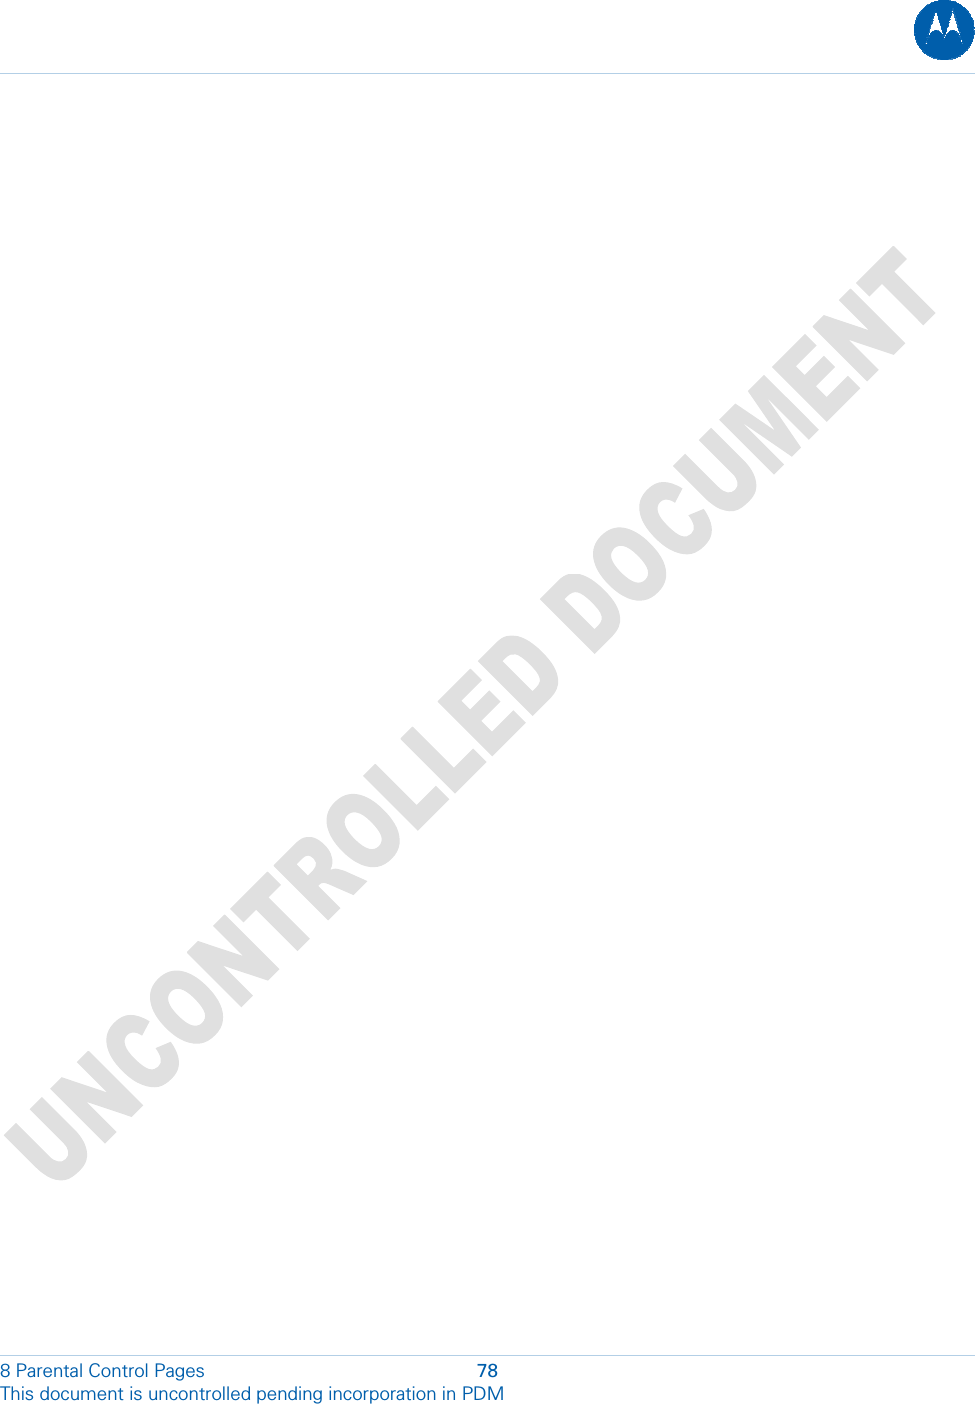  8 Parental Control Pages  78 This document is uncontrolled pending incorporation in PDM  